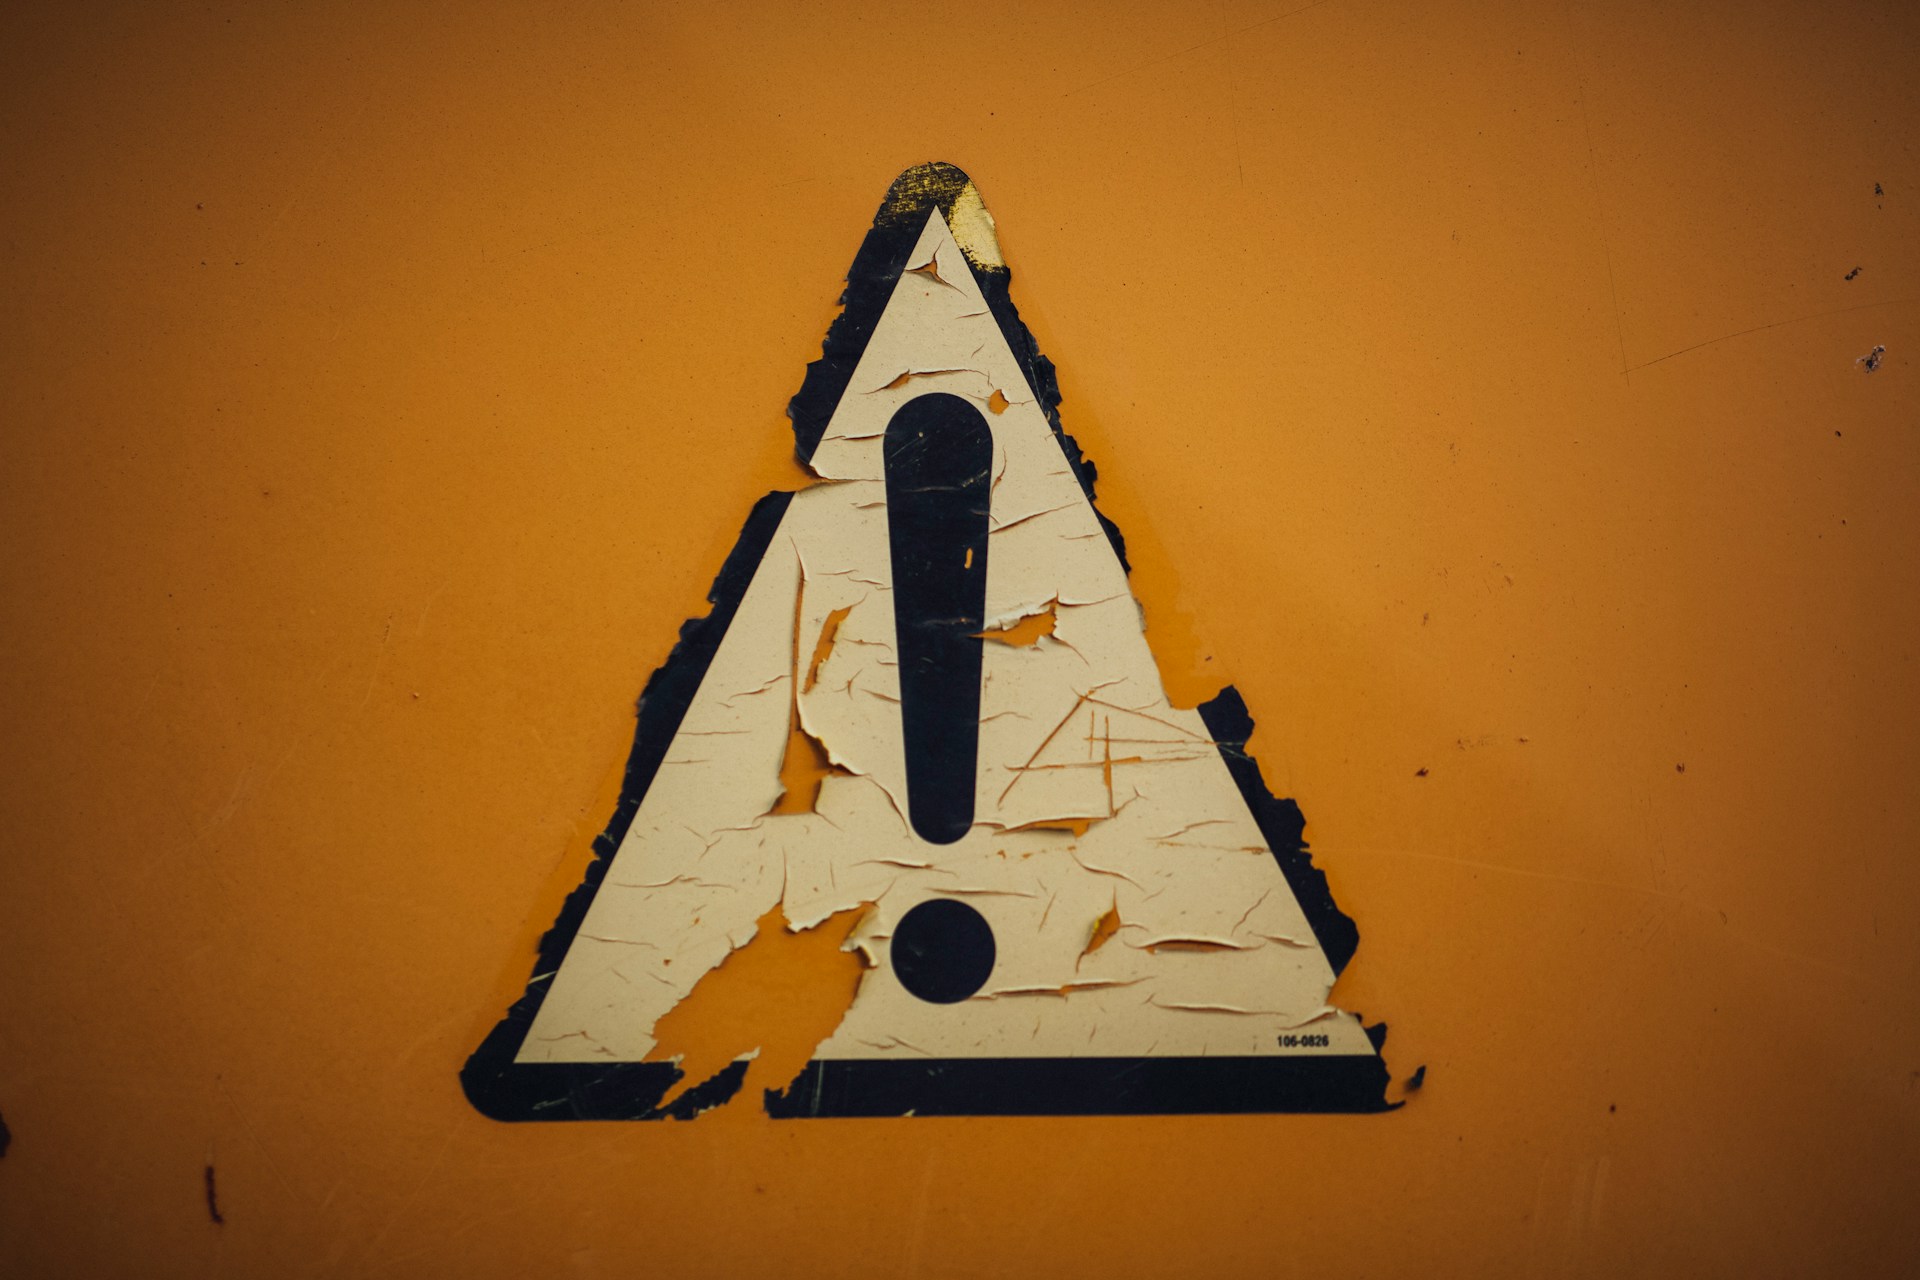 A torn sign showing an exclamation point.